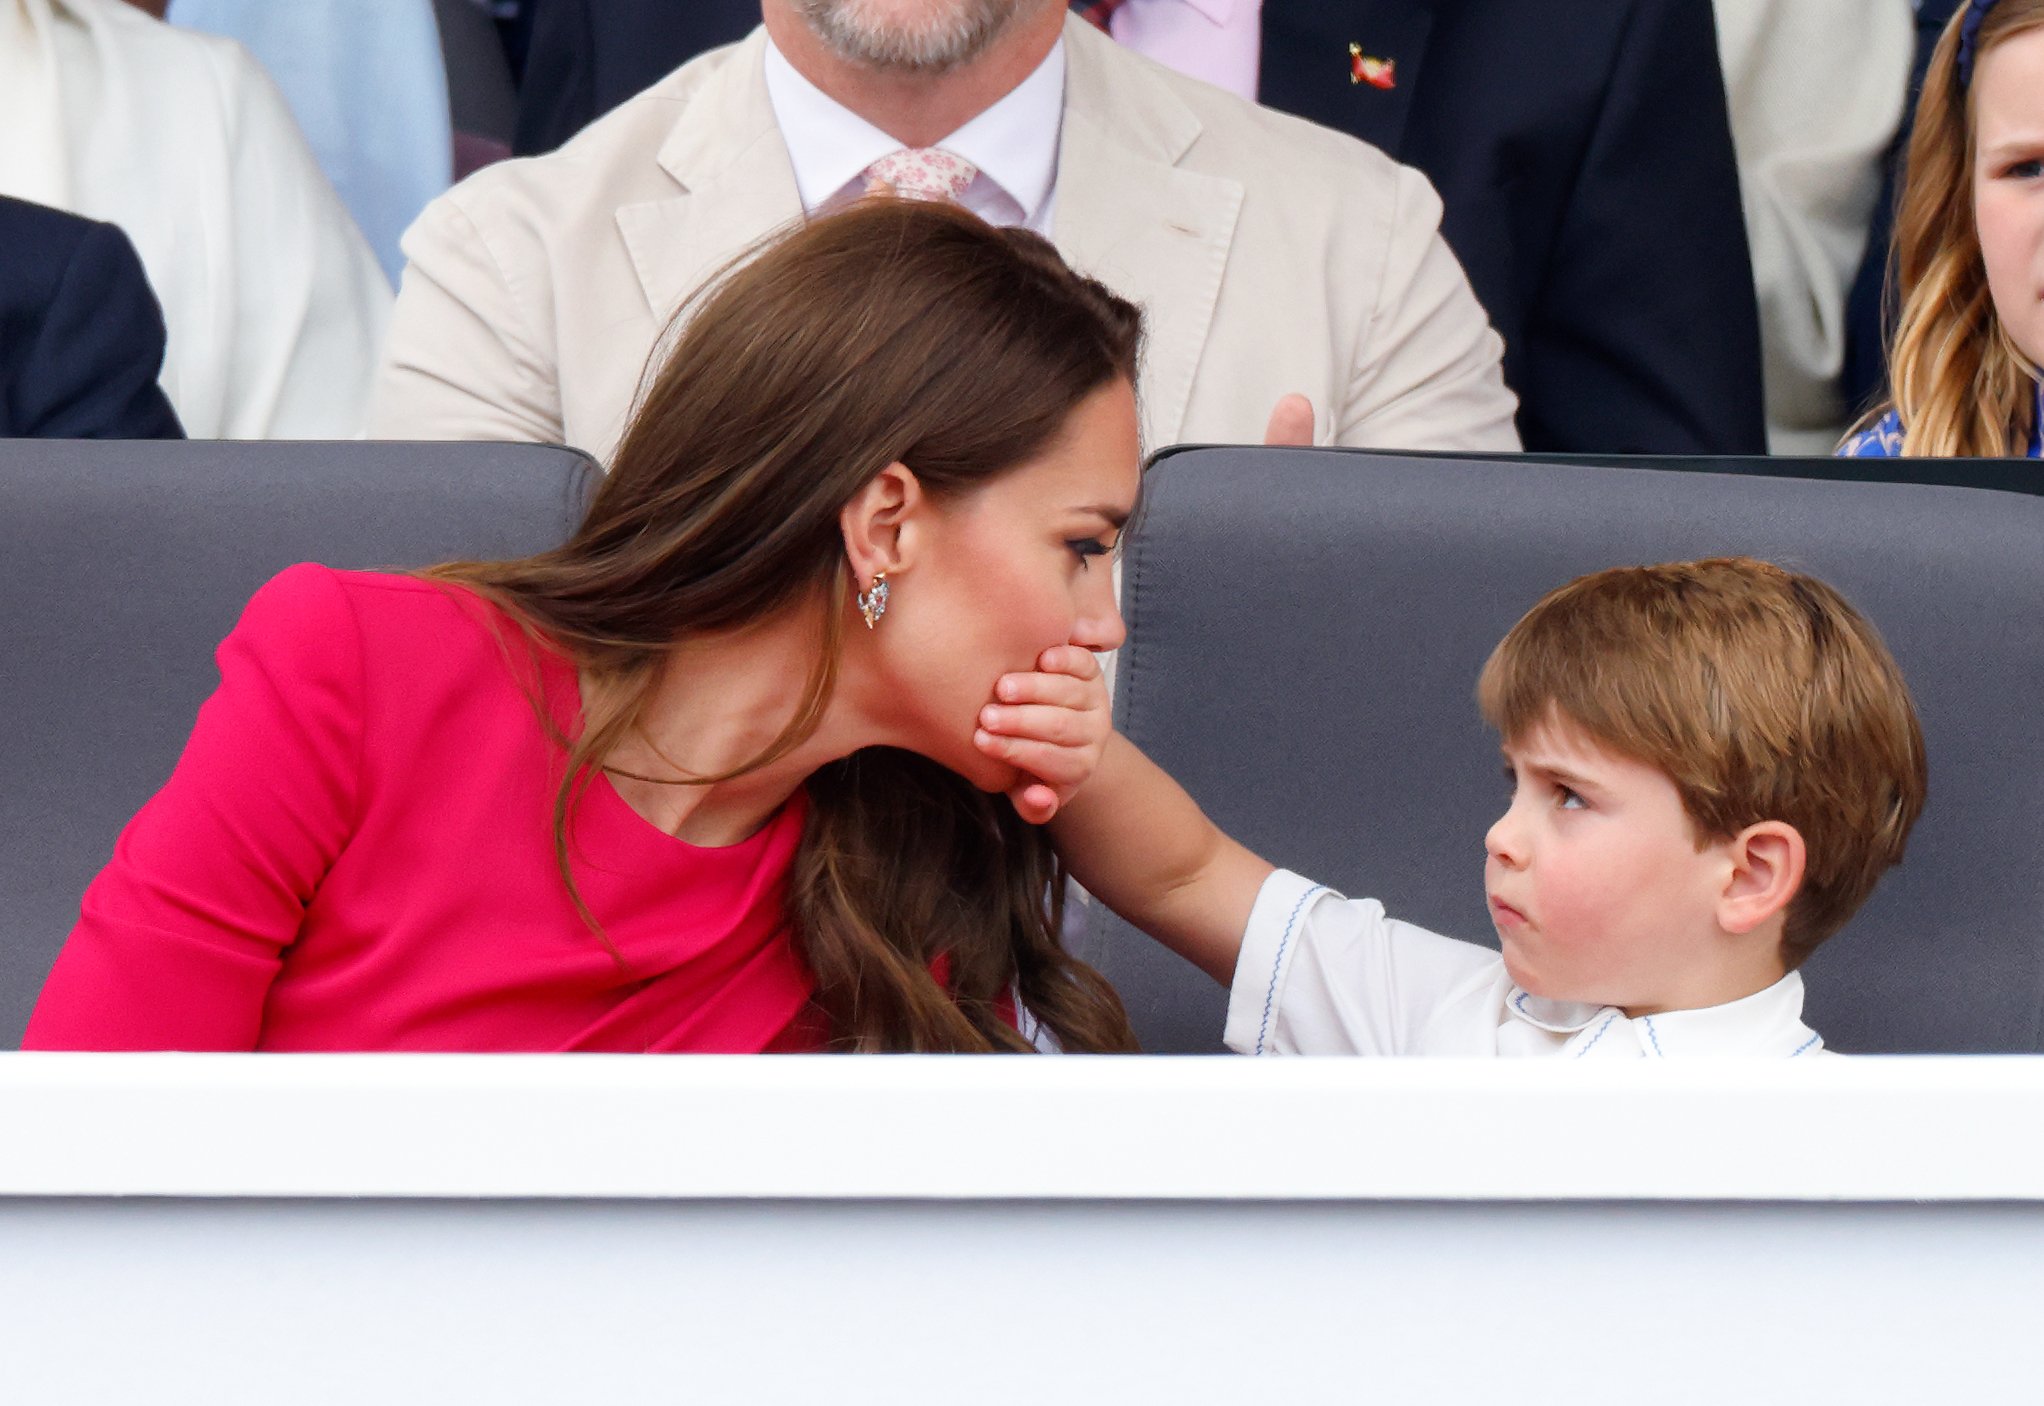 Prince Louis of Cambridge covering his mother Catherine, Duchess of Cambridge's mouth with his hand at the Platinum Pageant on The Mall on June 5, 2022 in London, England. | Source: Getty Images